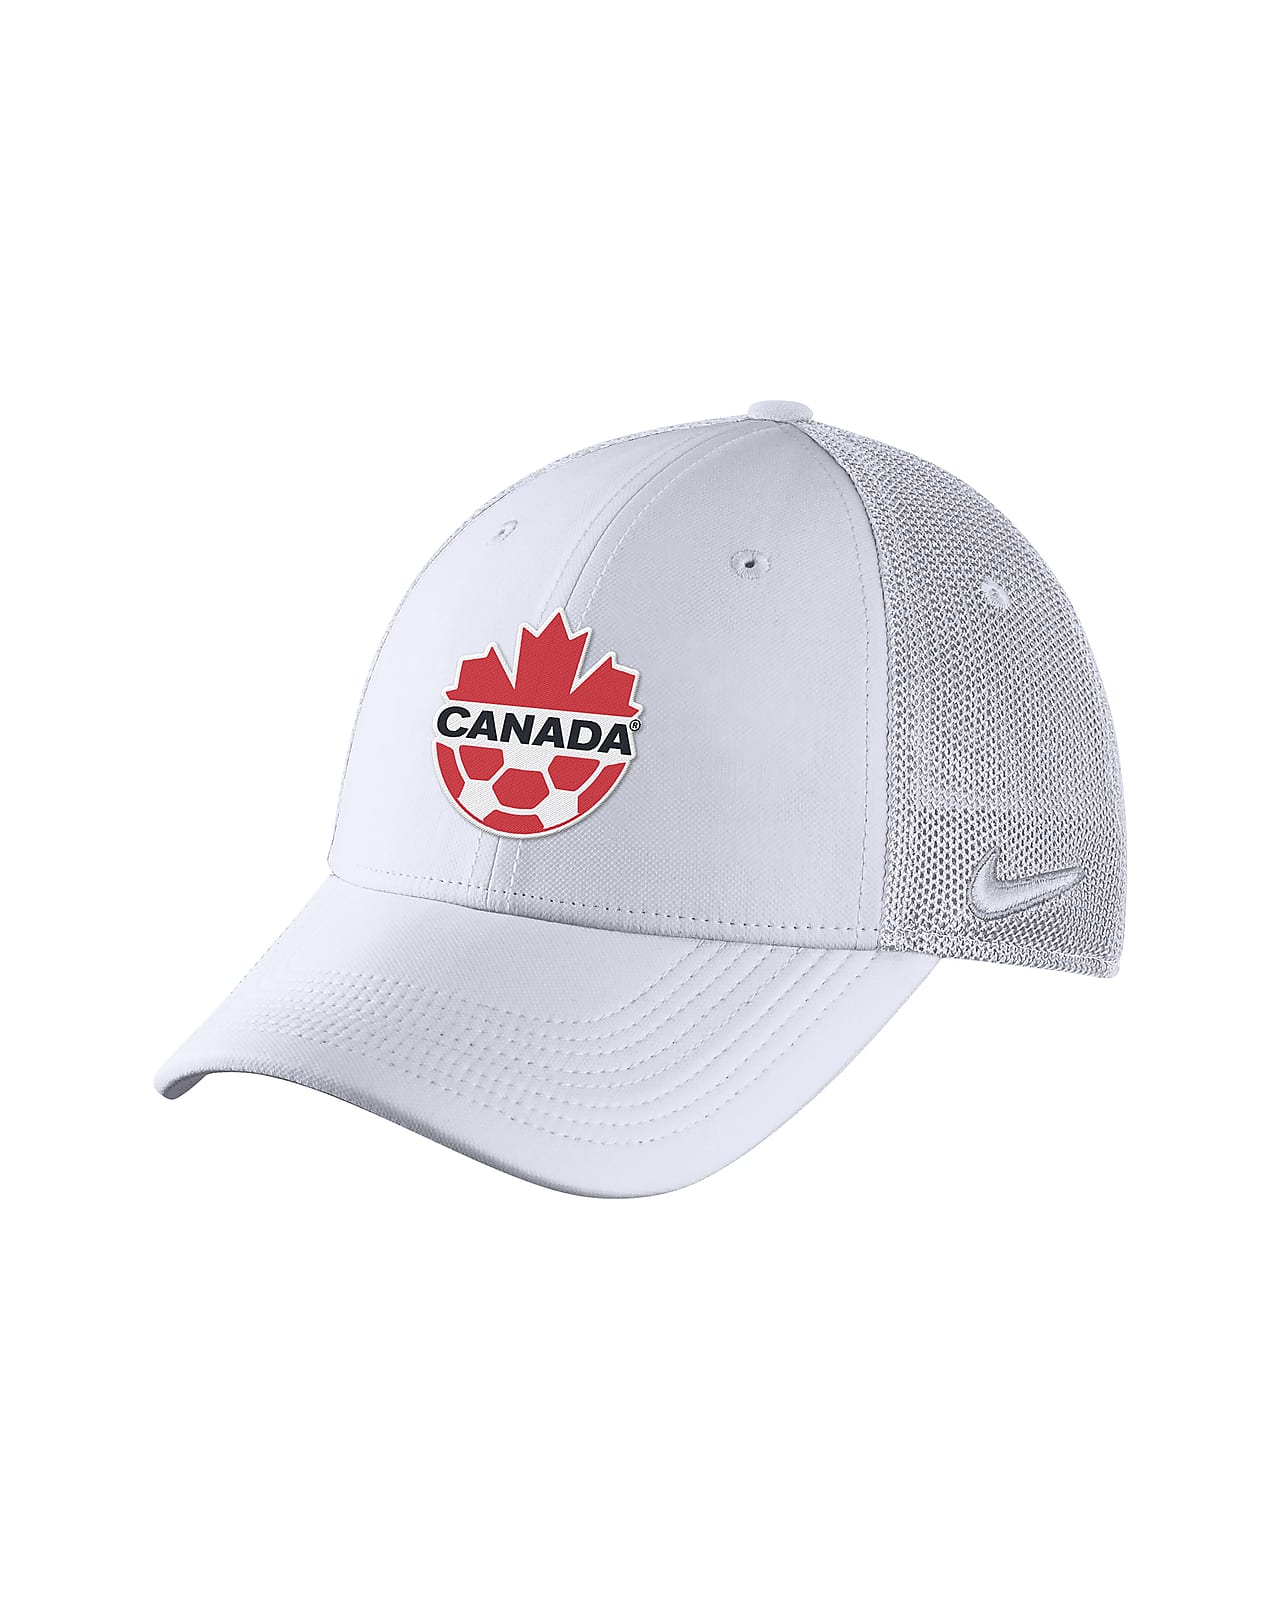 Canada Legacy91 Men's Nike AeroBill Fitted Hat